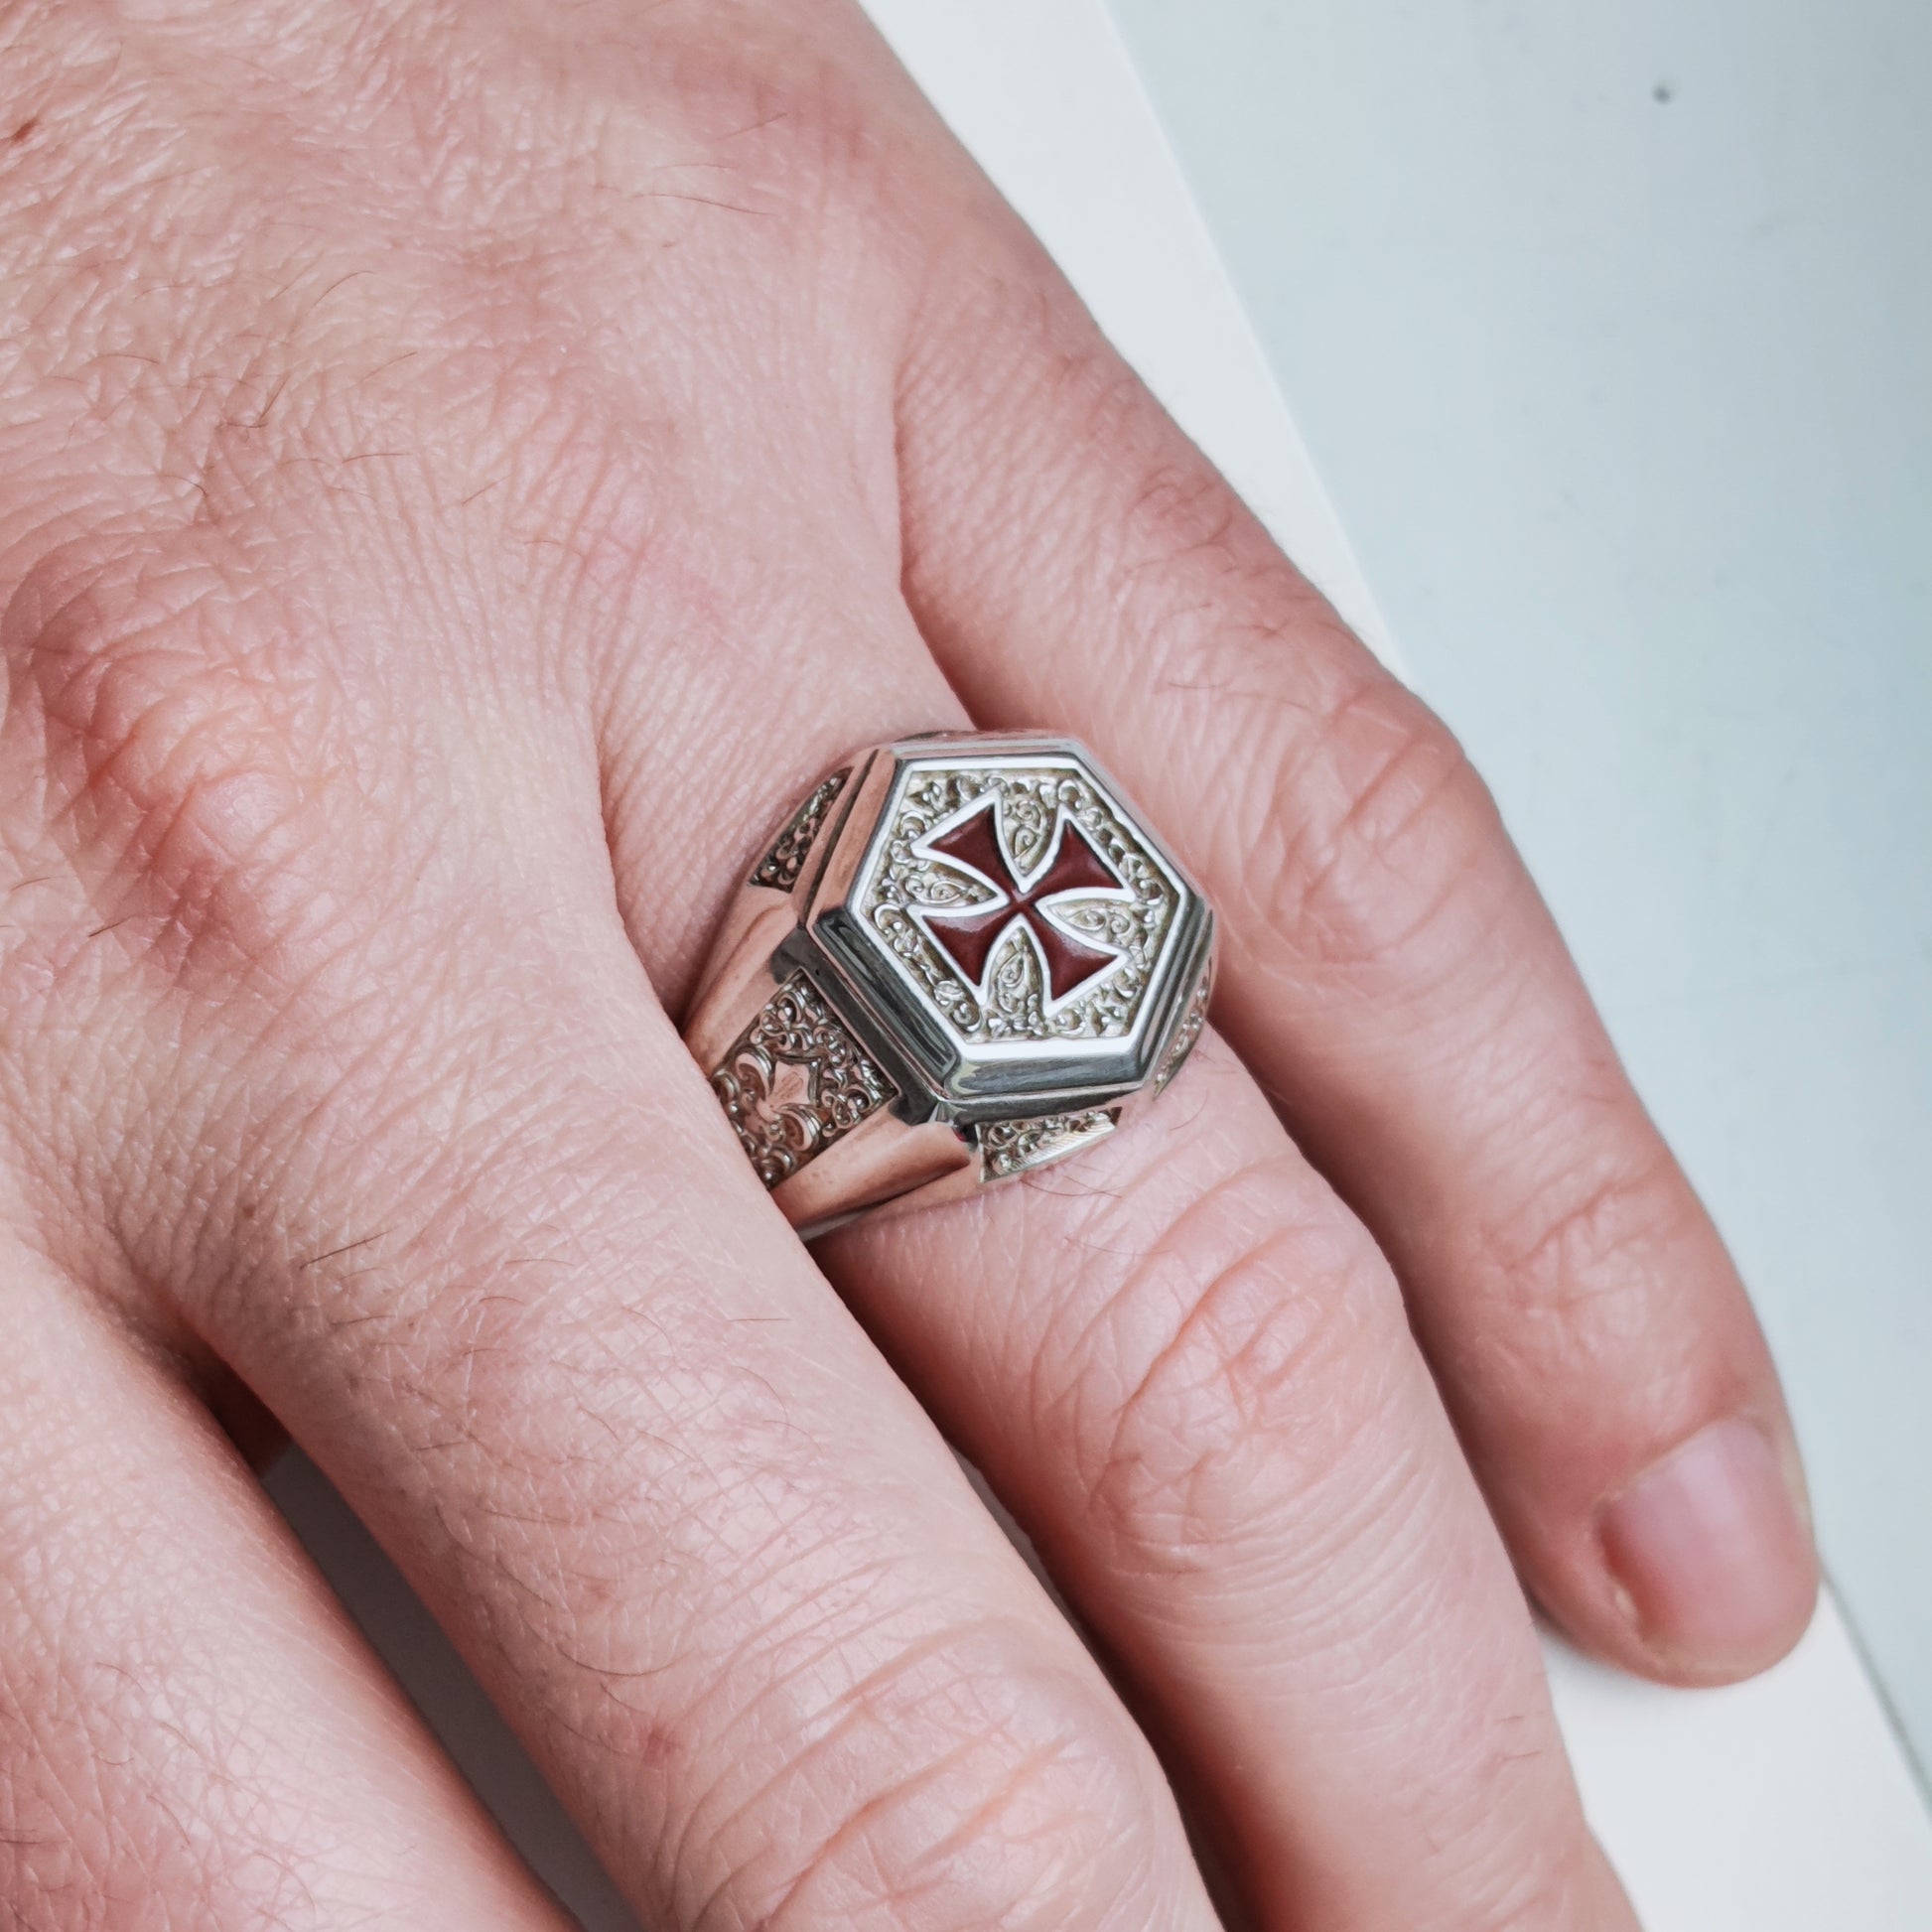 Knights Templar Ring, The Order of Solomon Temple Signet with Cross Red Enamel